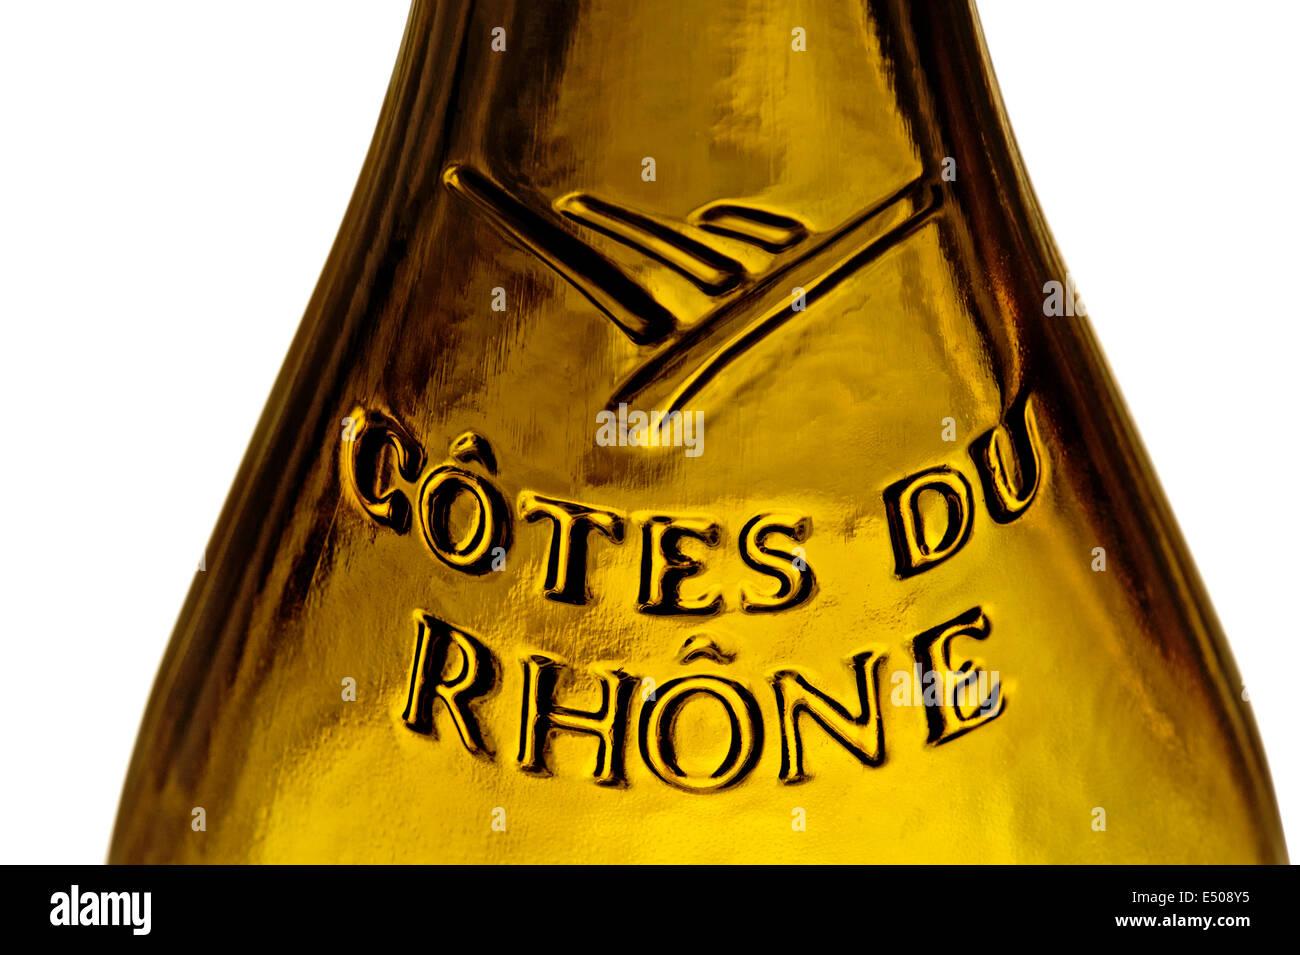 Cotes du Rhone wine view on the glass relief label on a bottle of French Cotes du Rhone wine Stock Photo